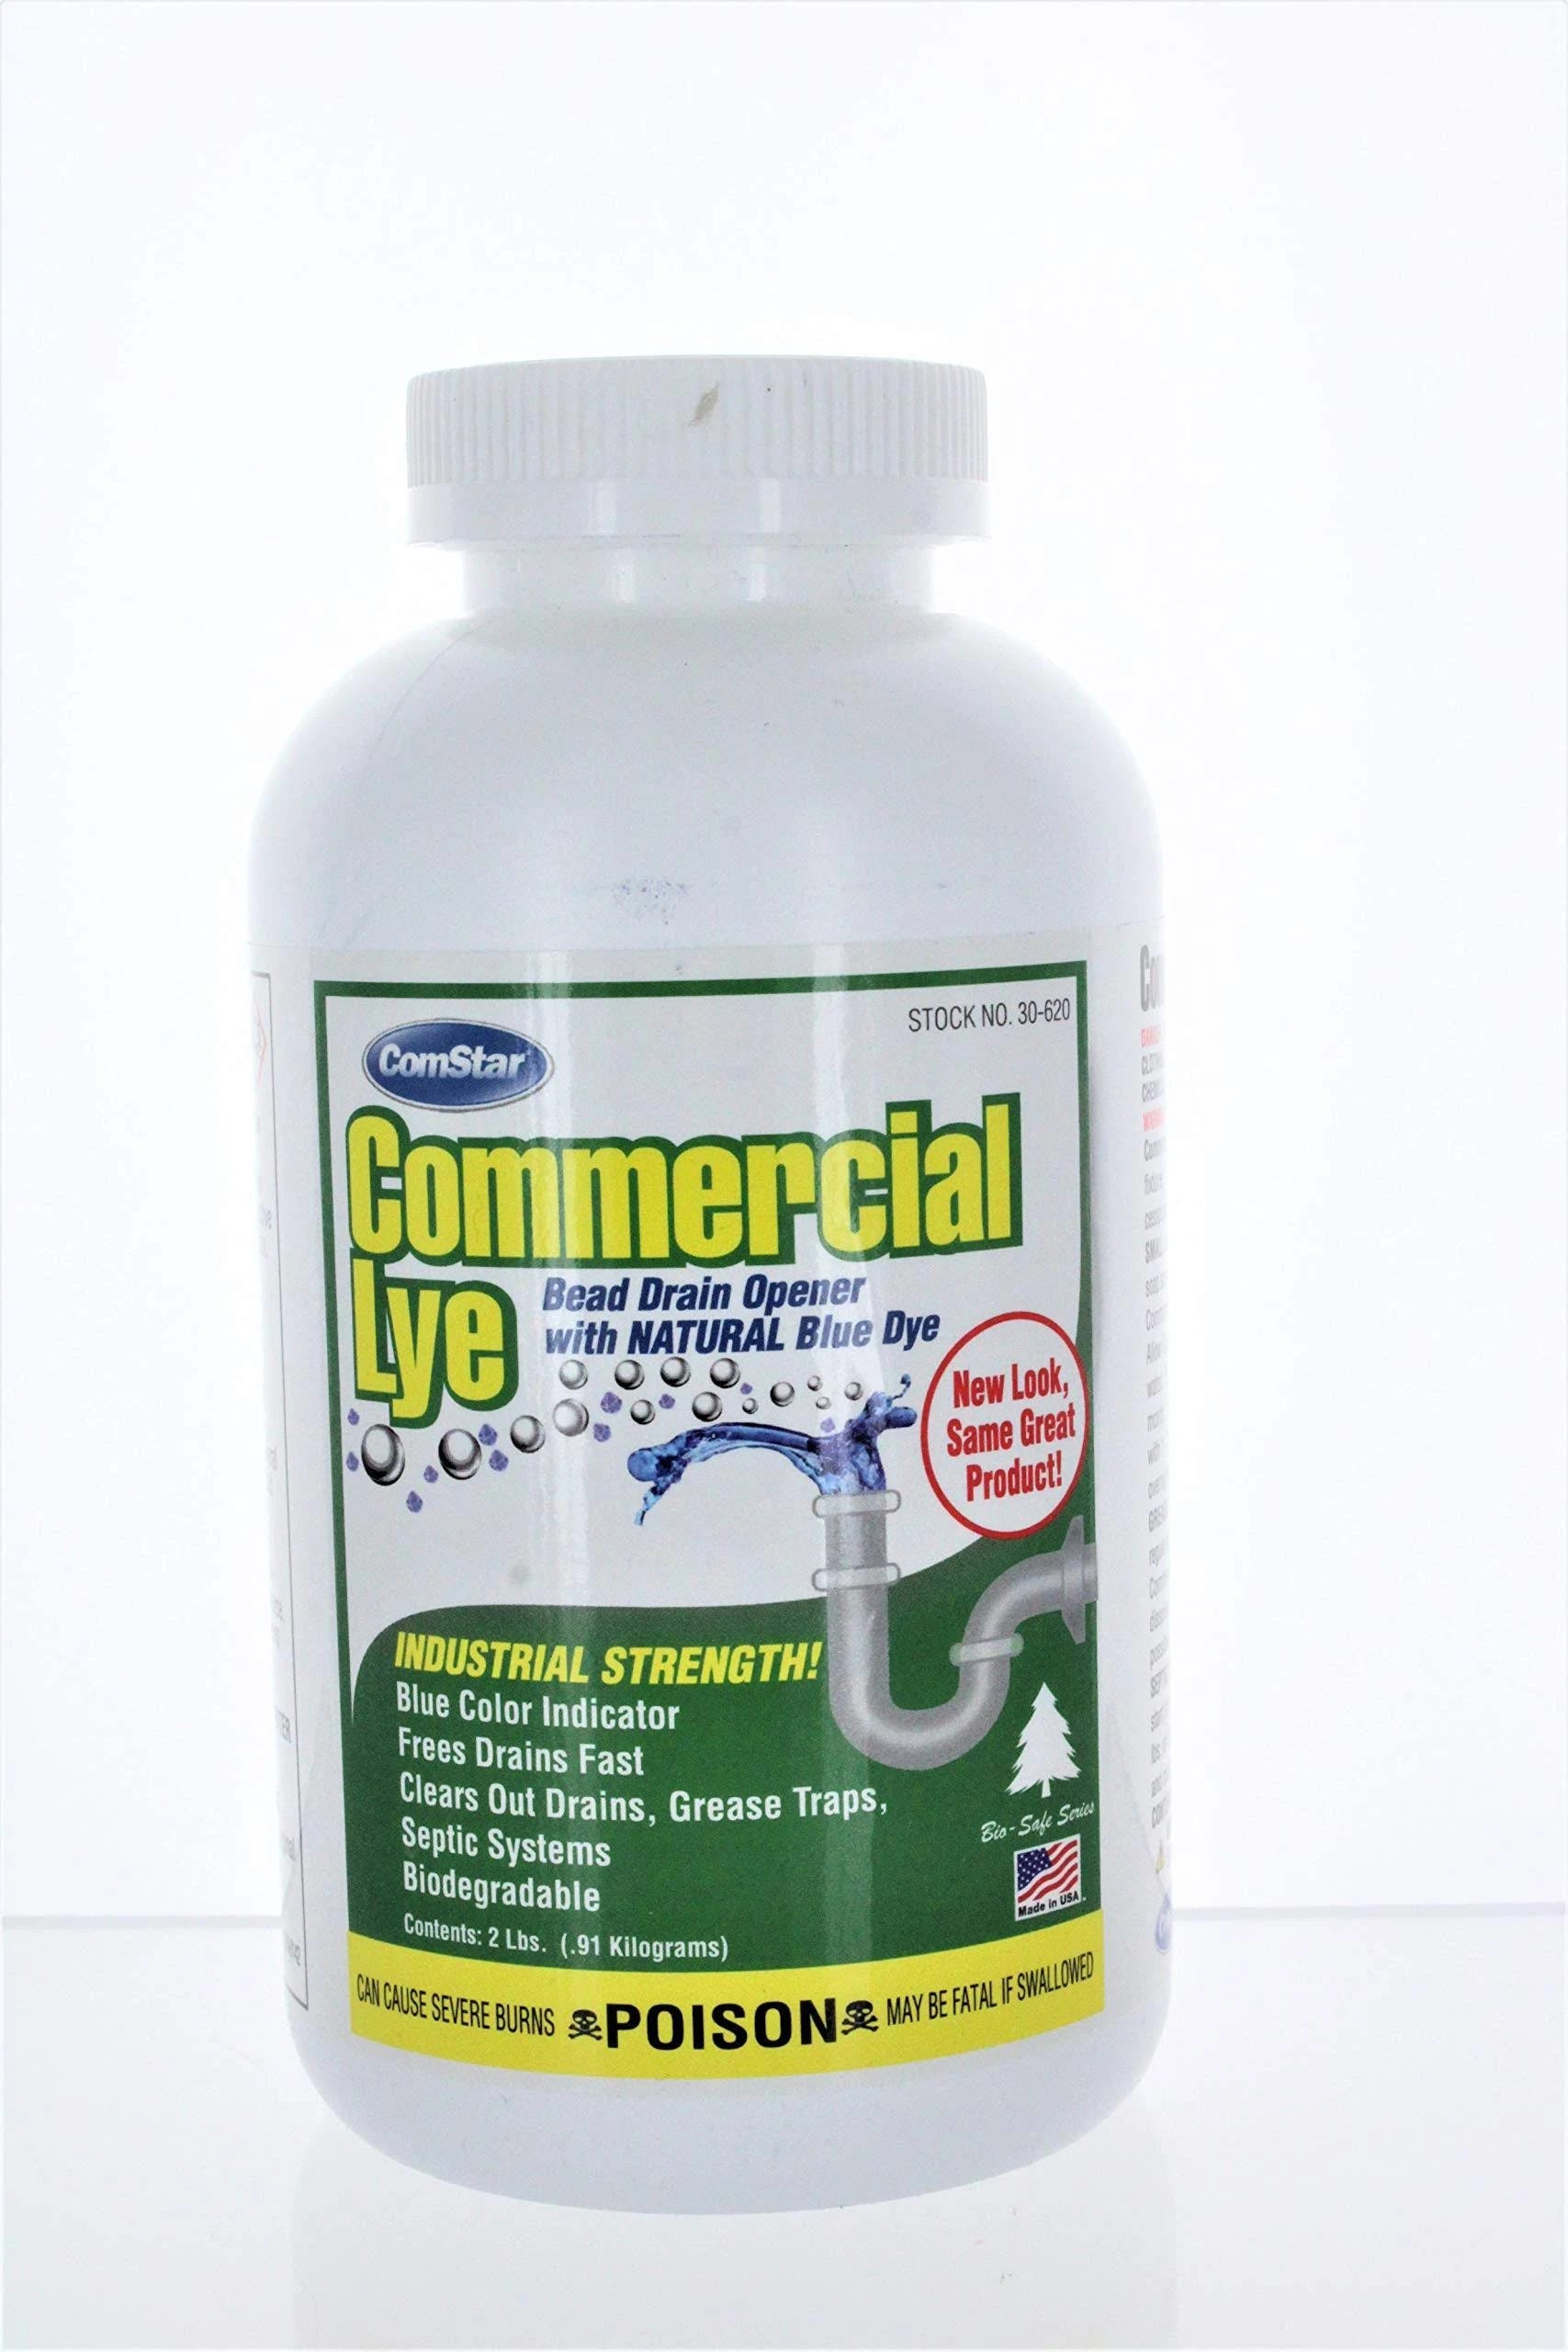 Comstar Biodegradable Drain Cleaner for Thrift Stores | Image